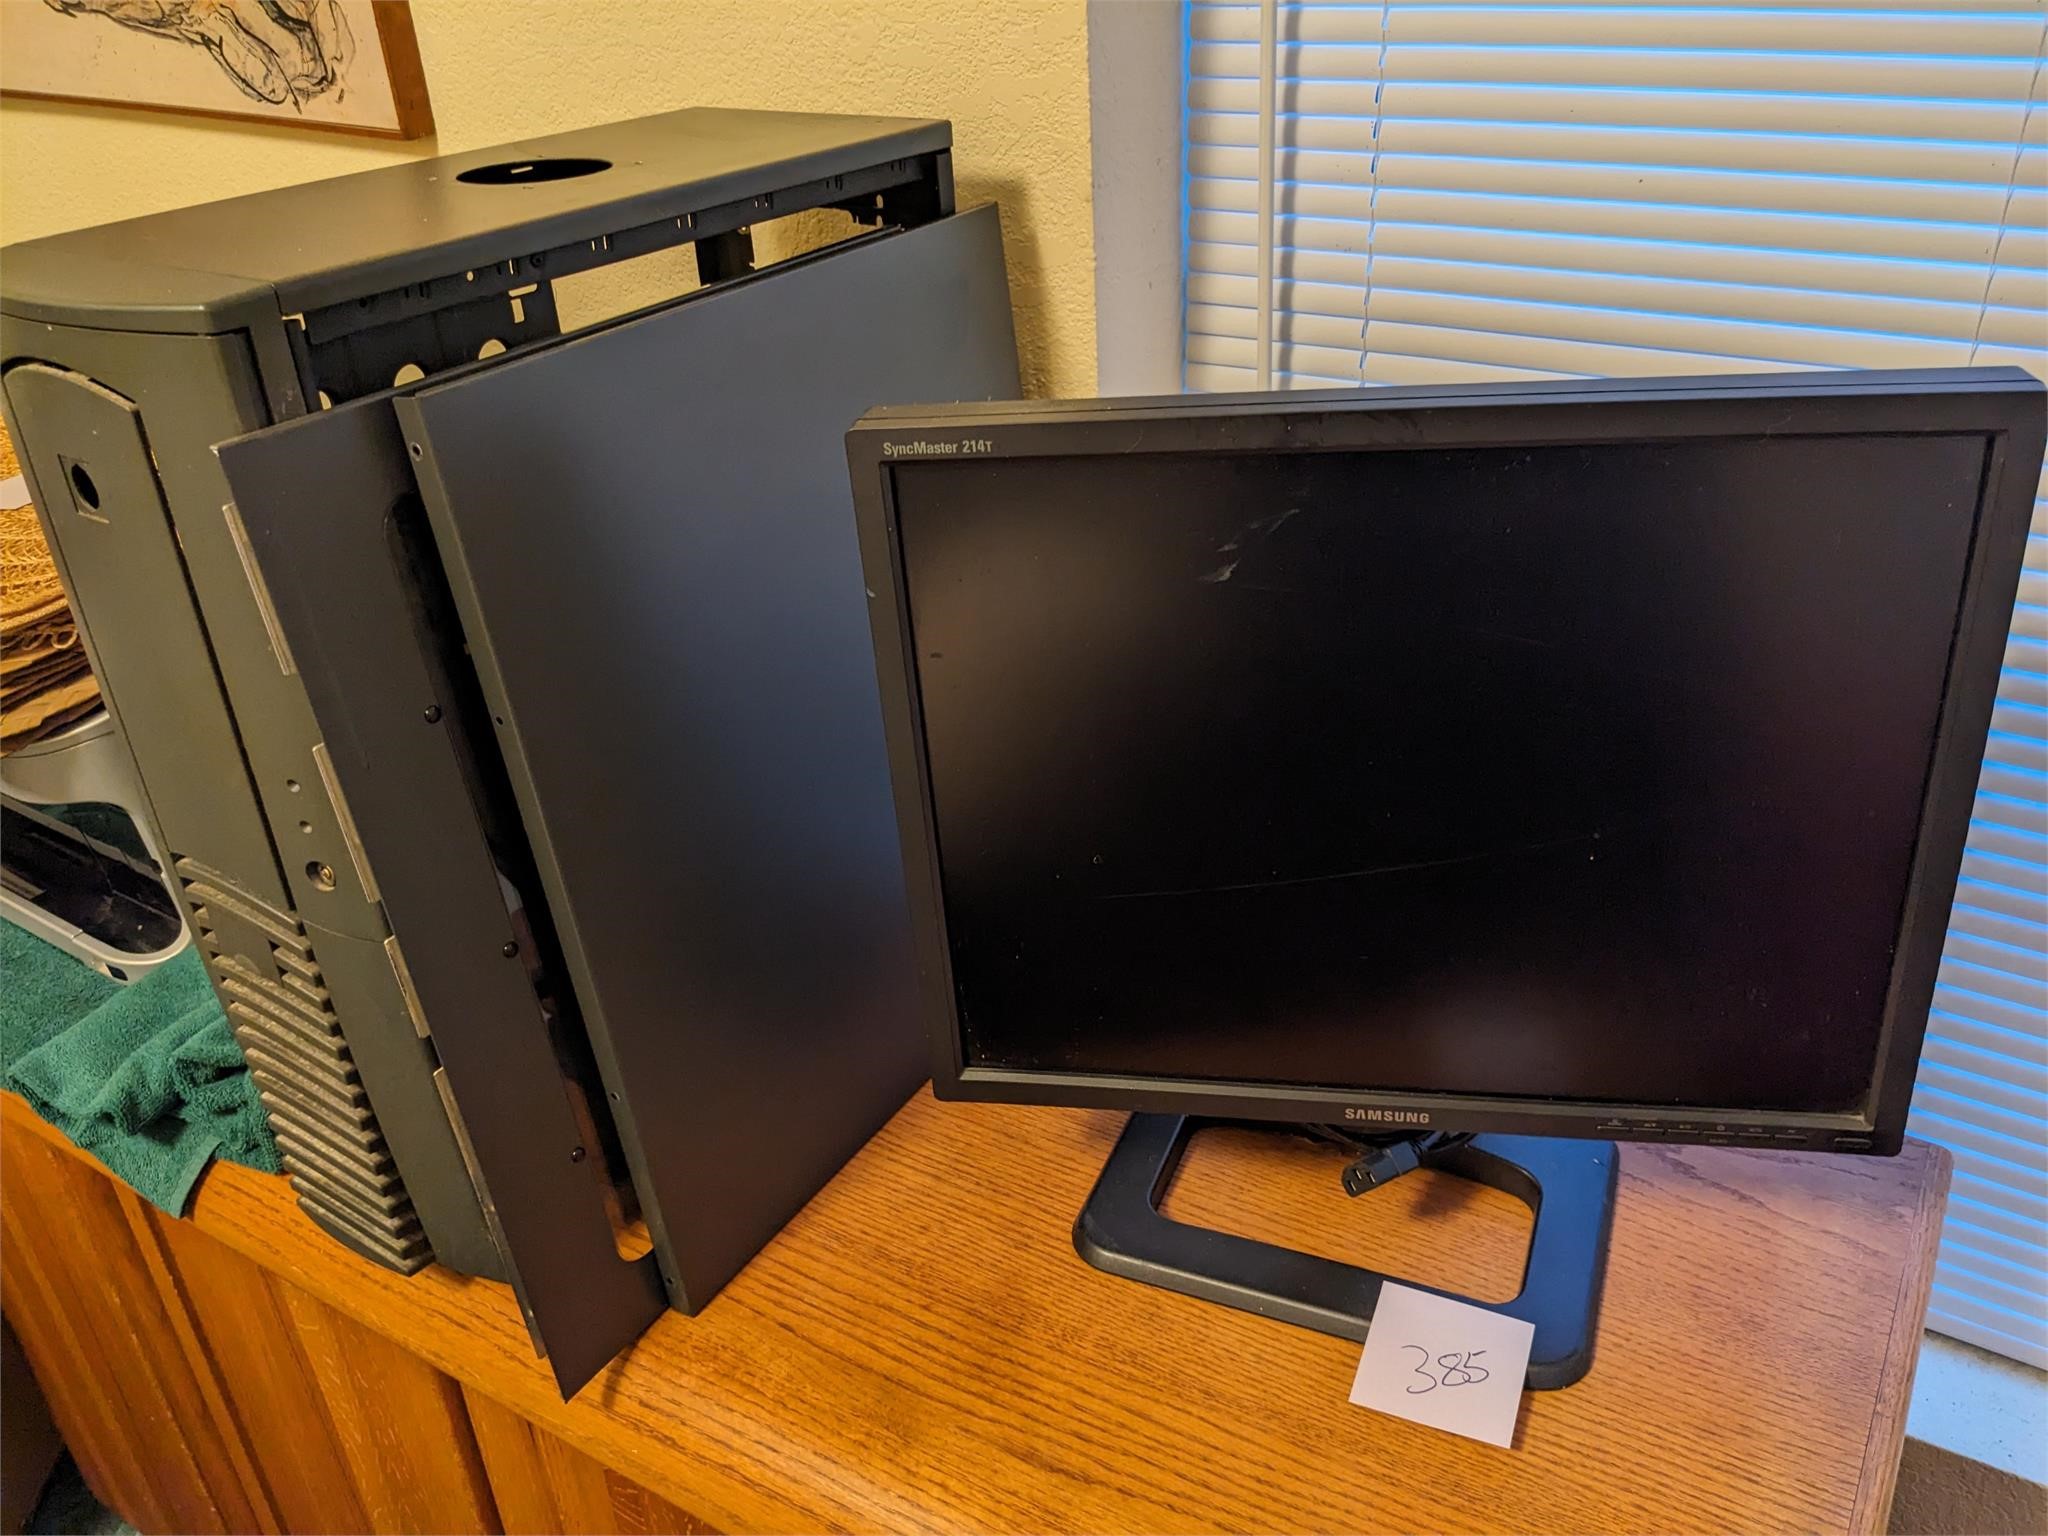 Monitor and Computer Tower Case